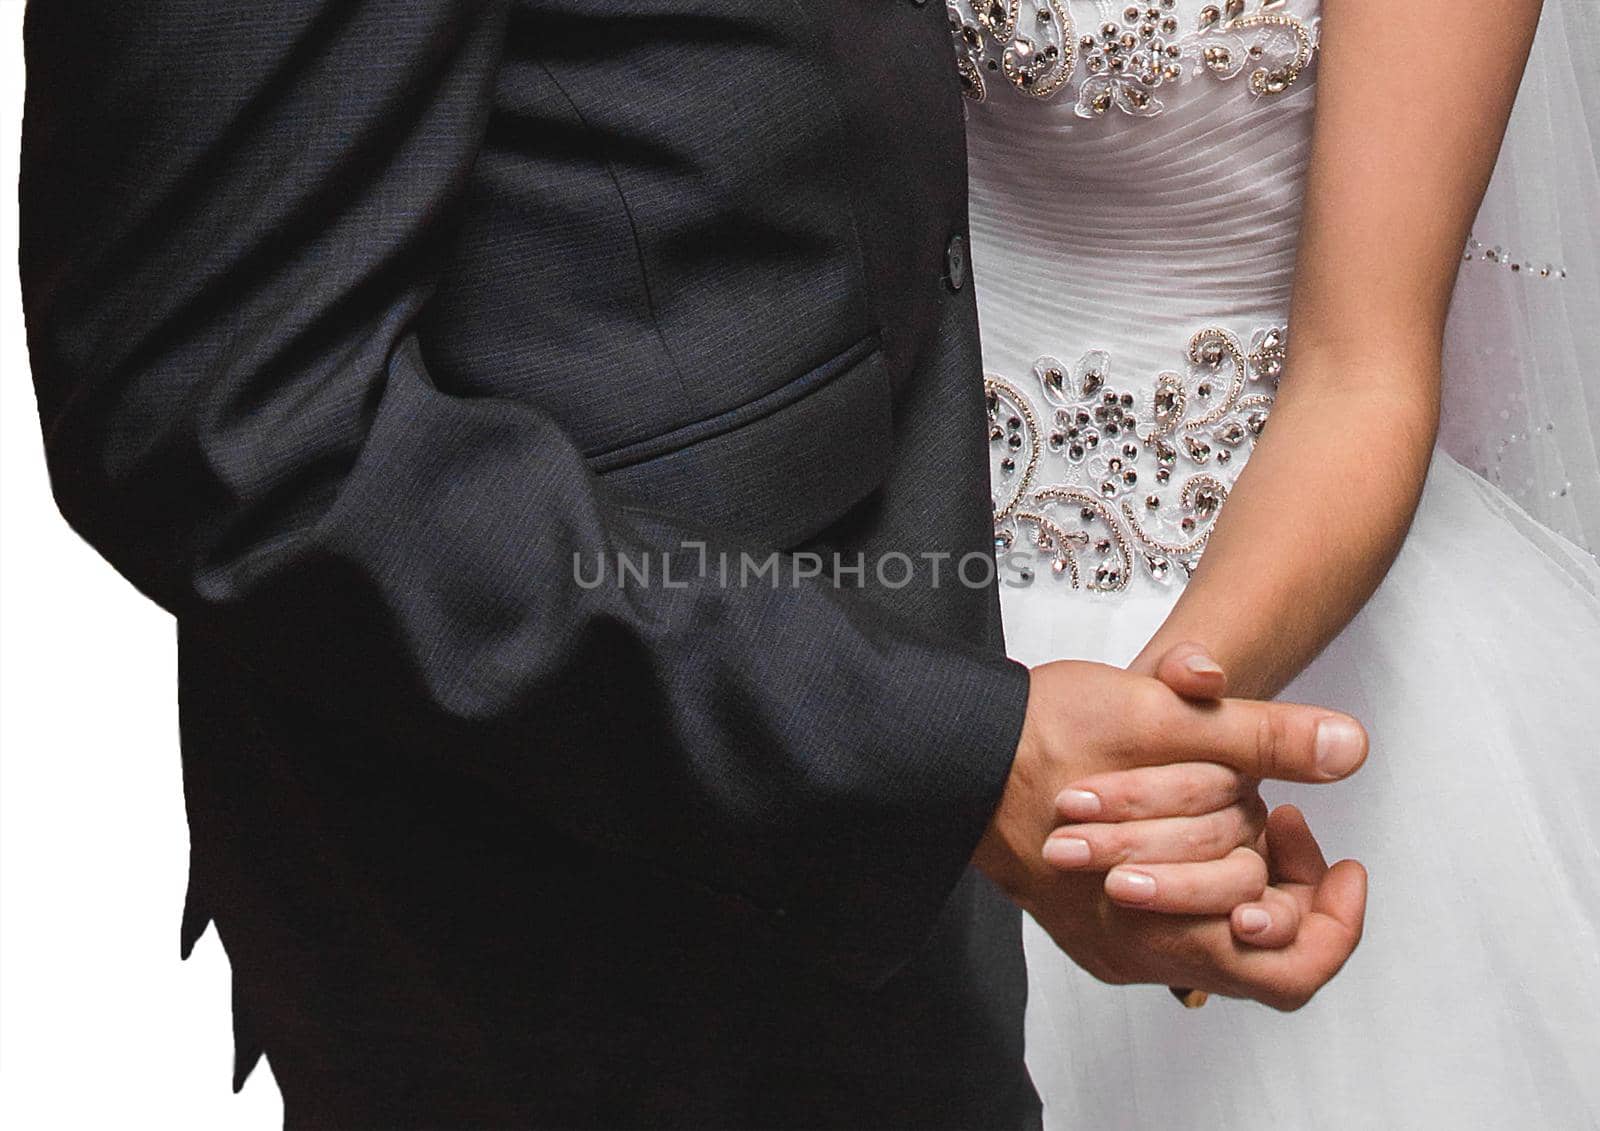 The bride and groom hold hands together tightly close-up at the wedding by AYDO8